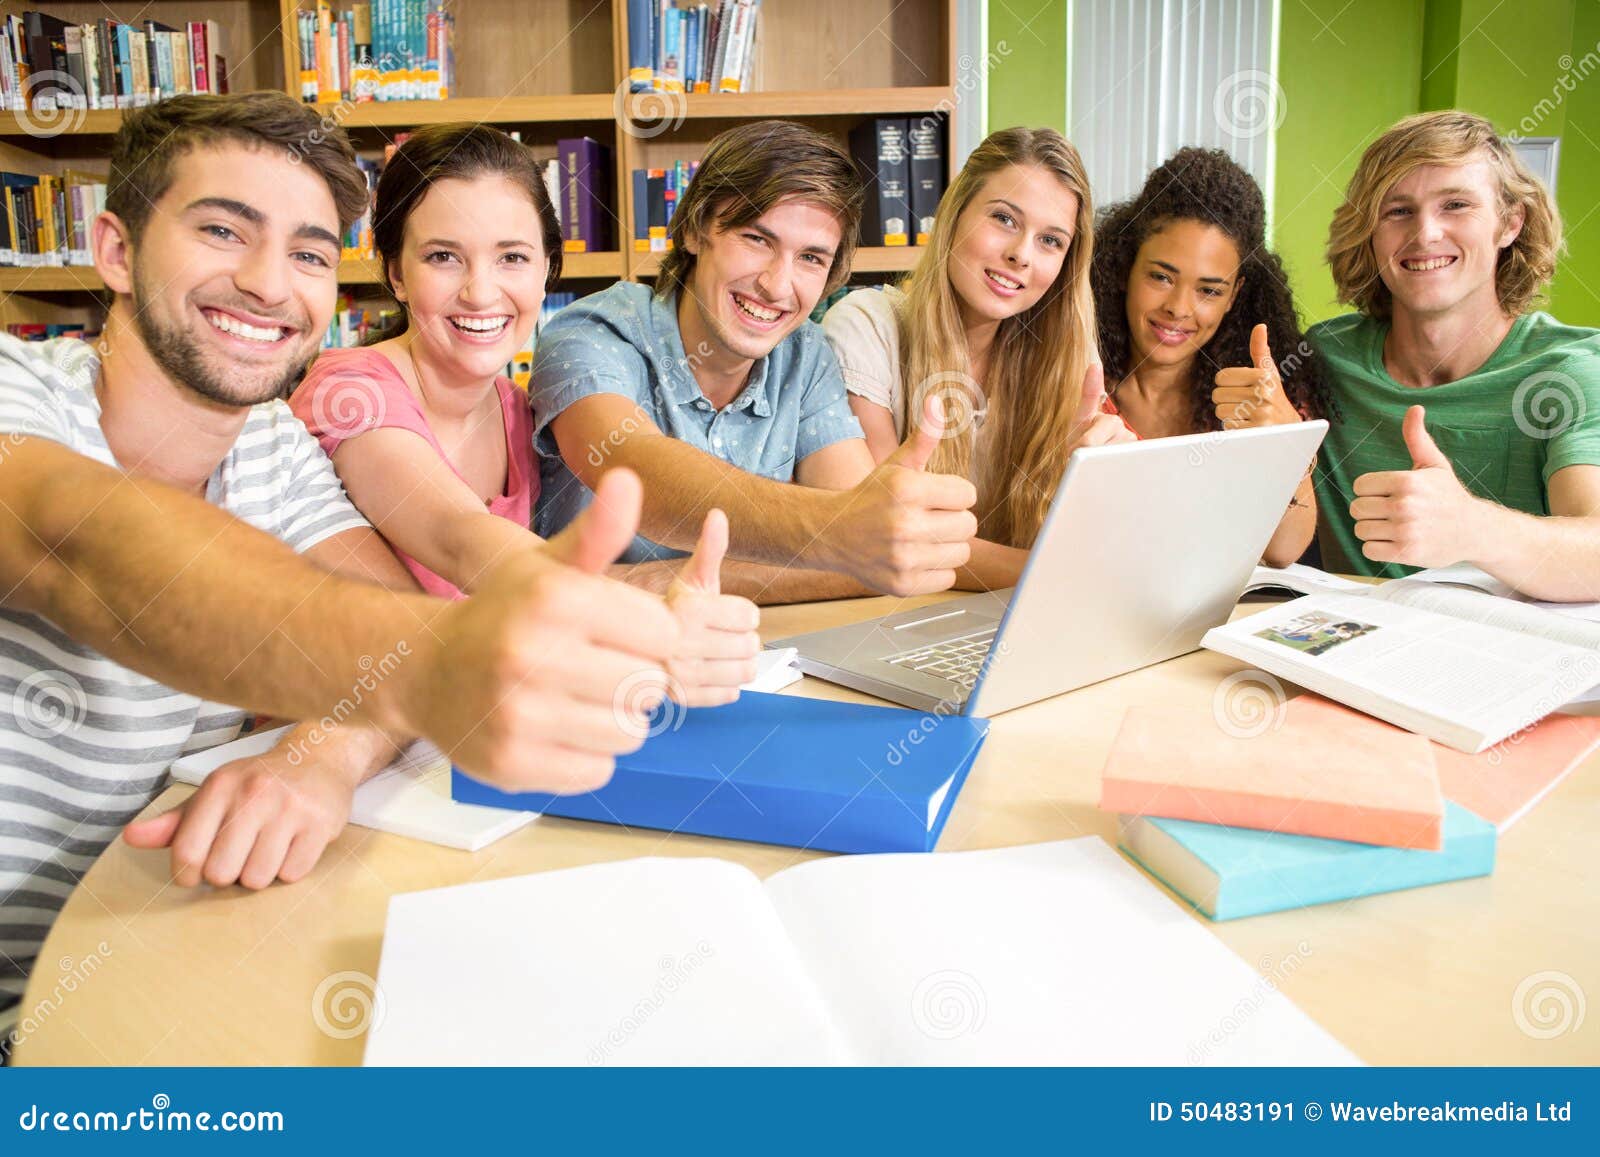 College Students Gesturing Thumbs Up In Library Stock Image